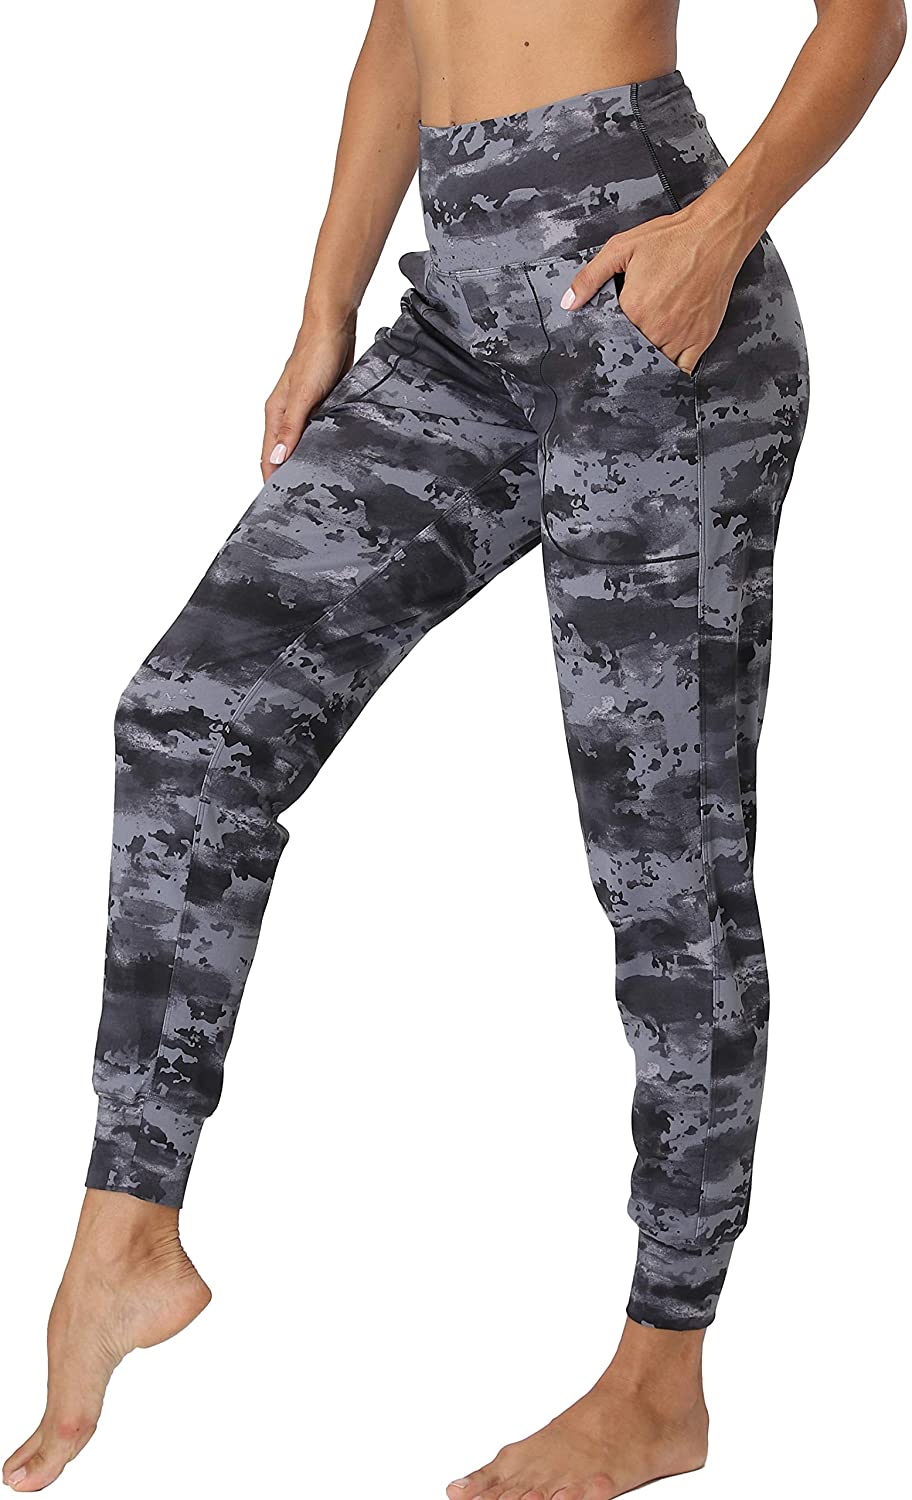 Buy Oalka Women's Joggers Drawstring Running Pants Workout Hiking  Sweatpants with Pockets, Grey White Frog, X-Large at